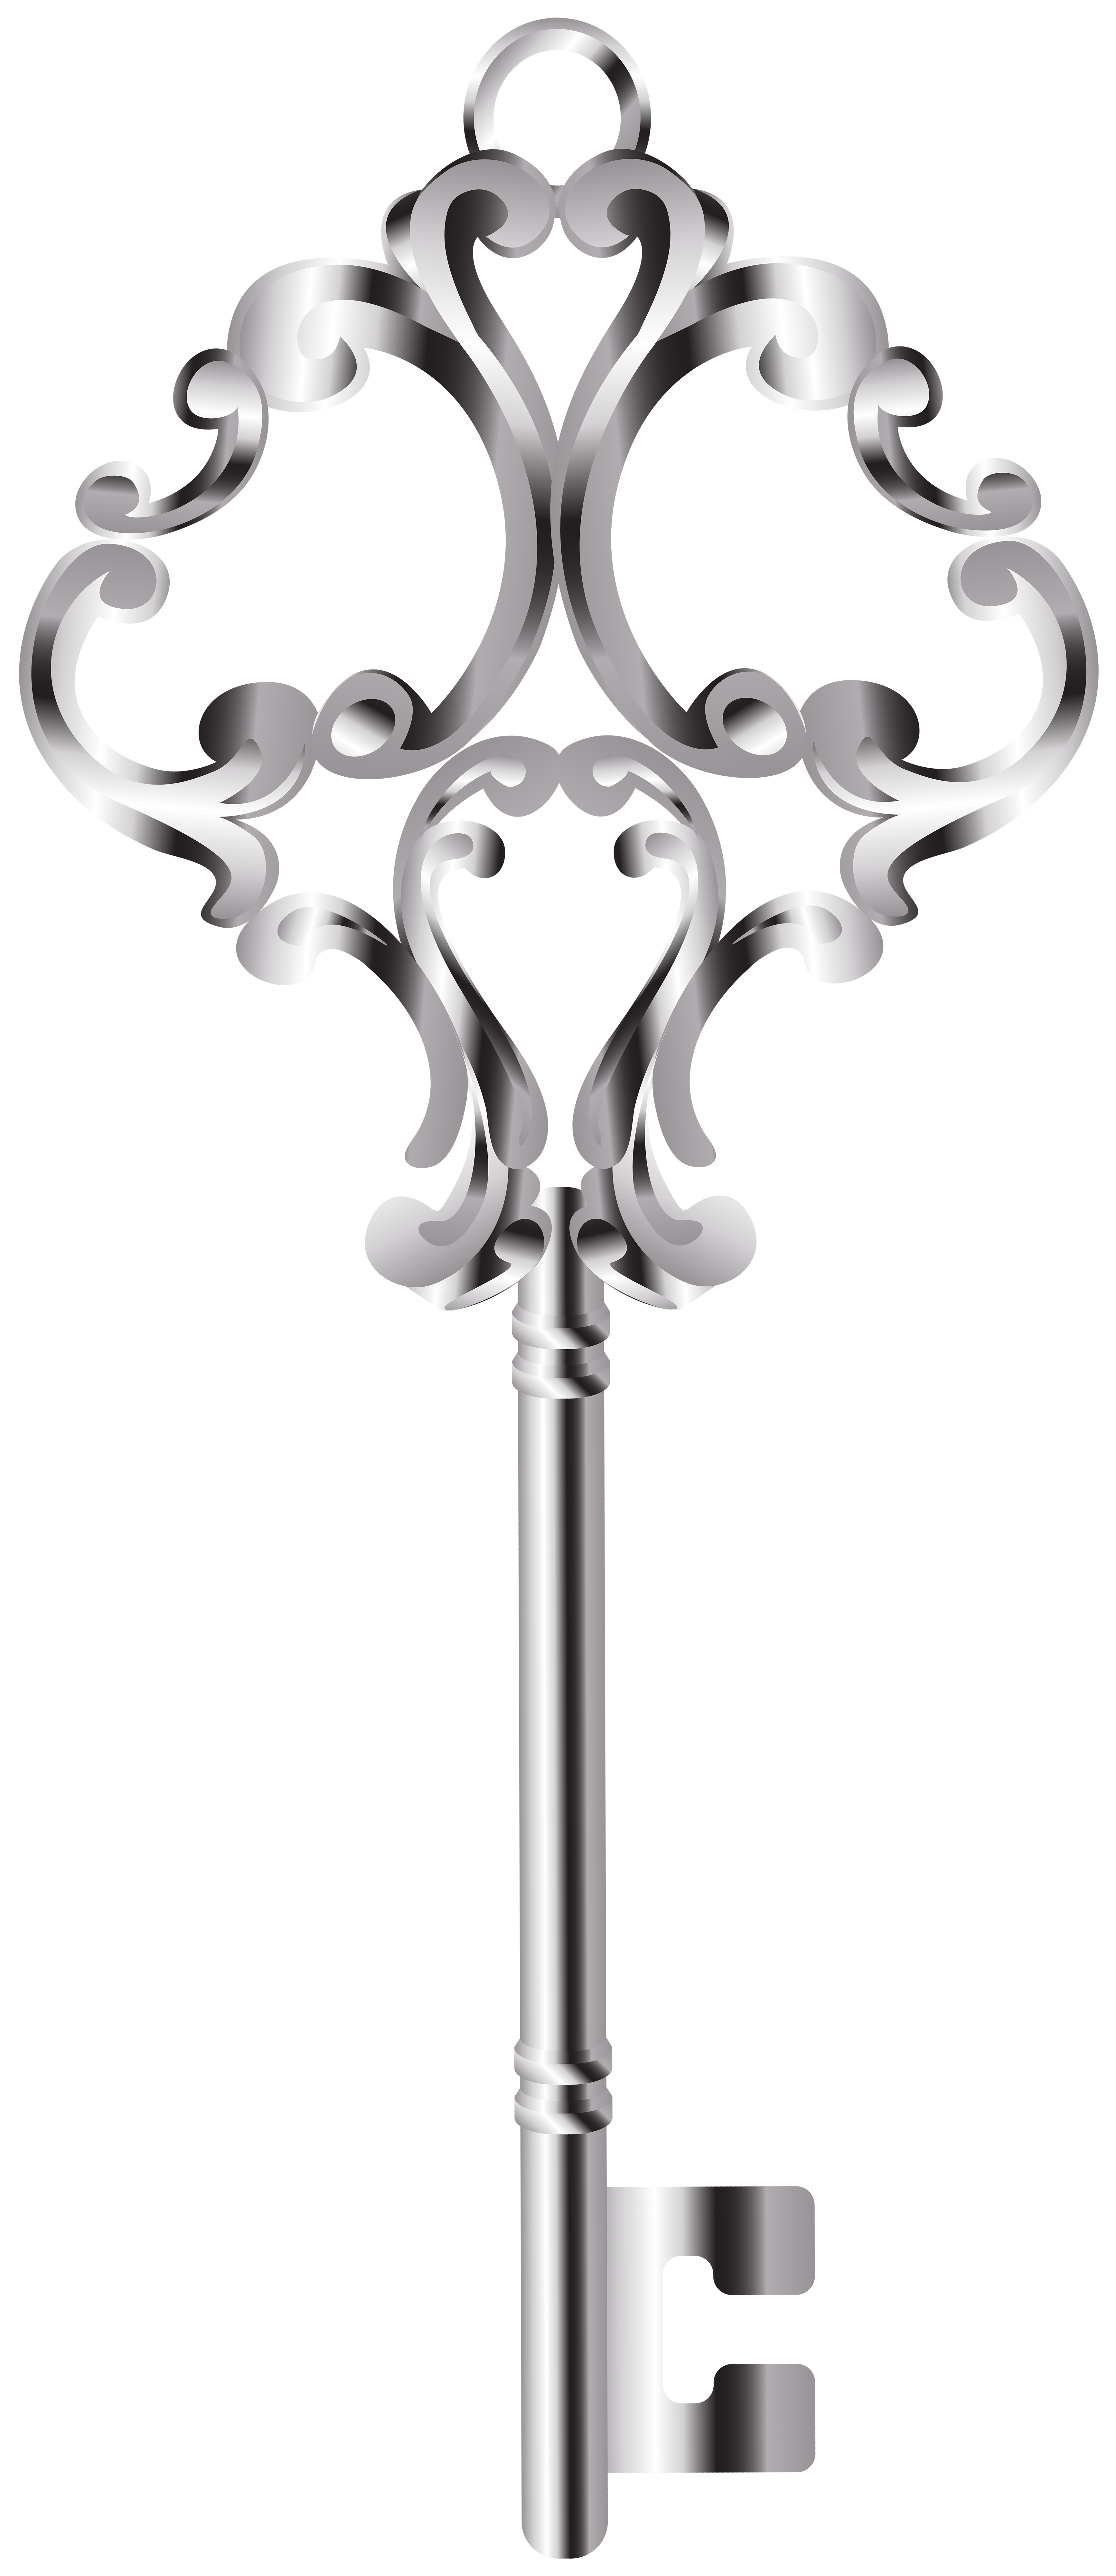 Silver Key PNG Clip Art | Gallery Yopriceville - High-Quality ...